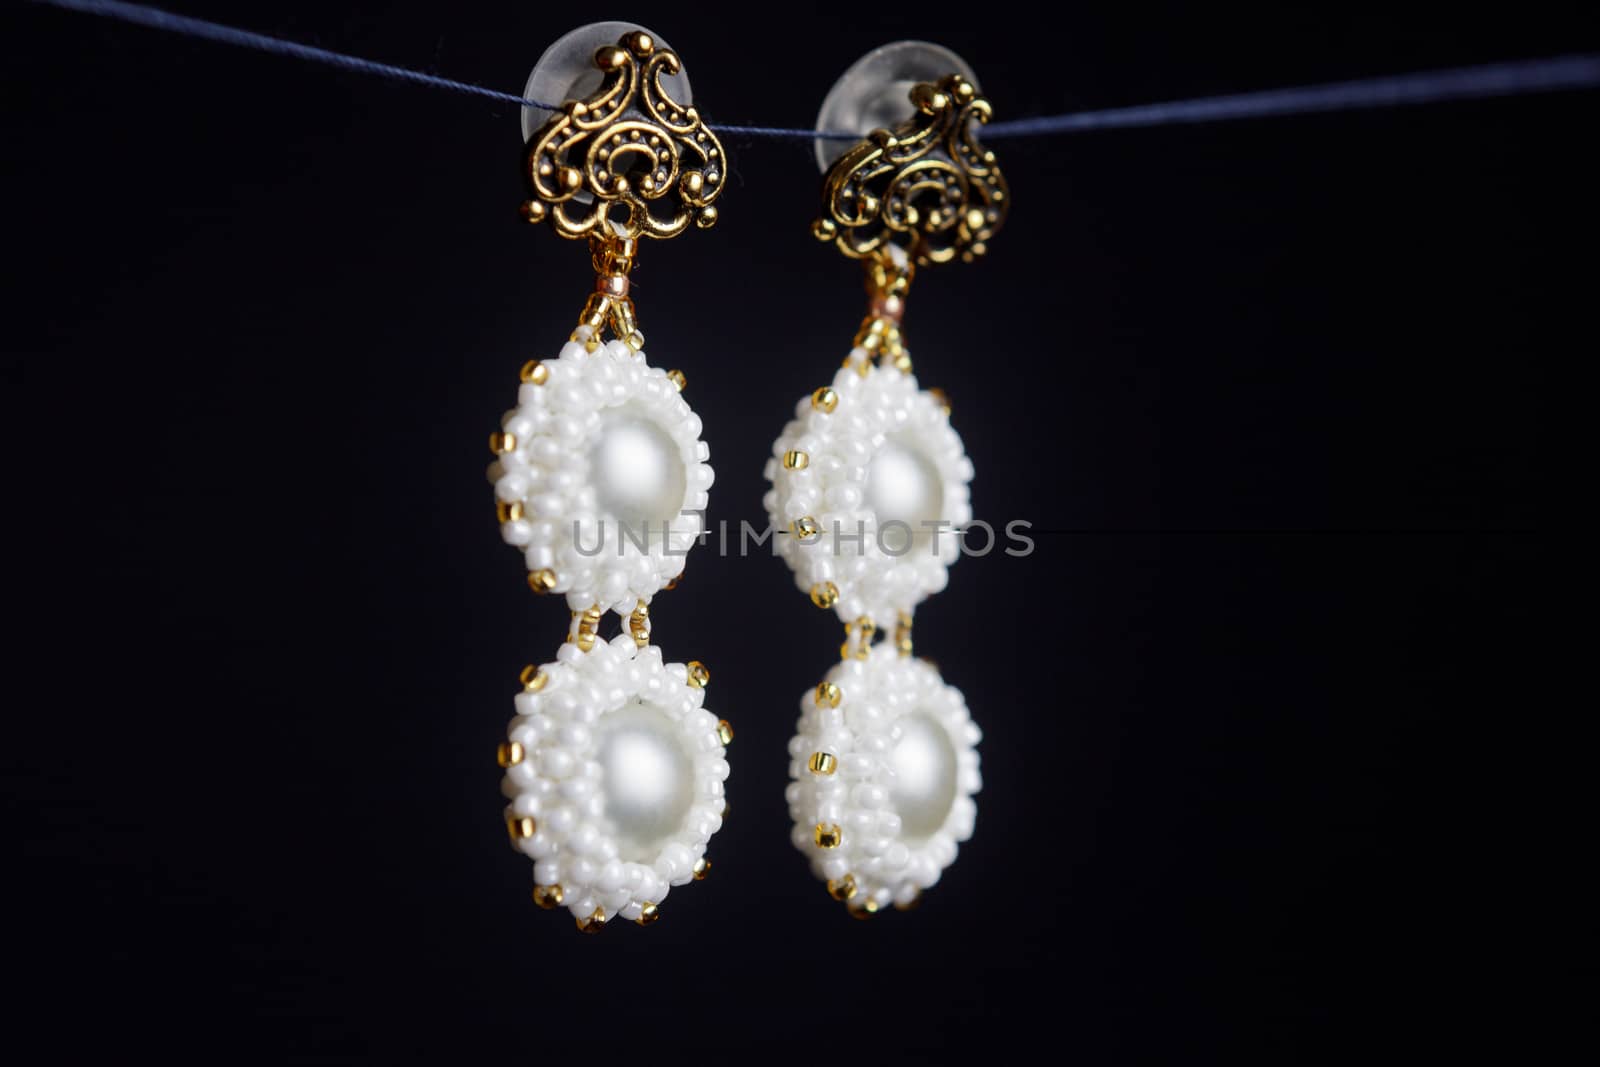 handmade jewelry made of beads in macro. earrings from white beads. earrings from stones. beautiful ornaments. earrings from white beads. ornaments on a black background by yulaphotographer